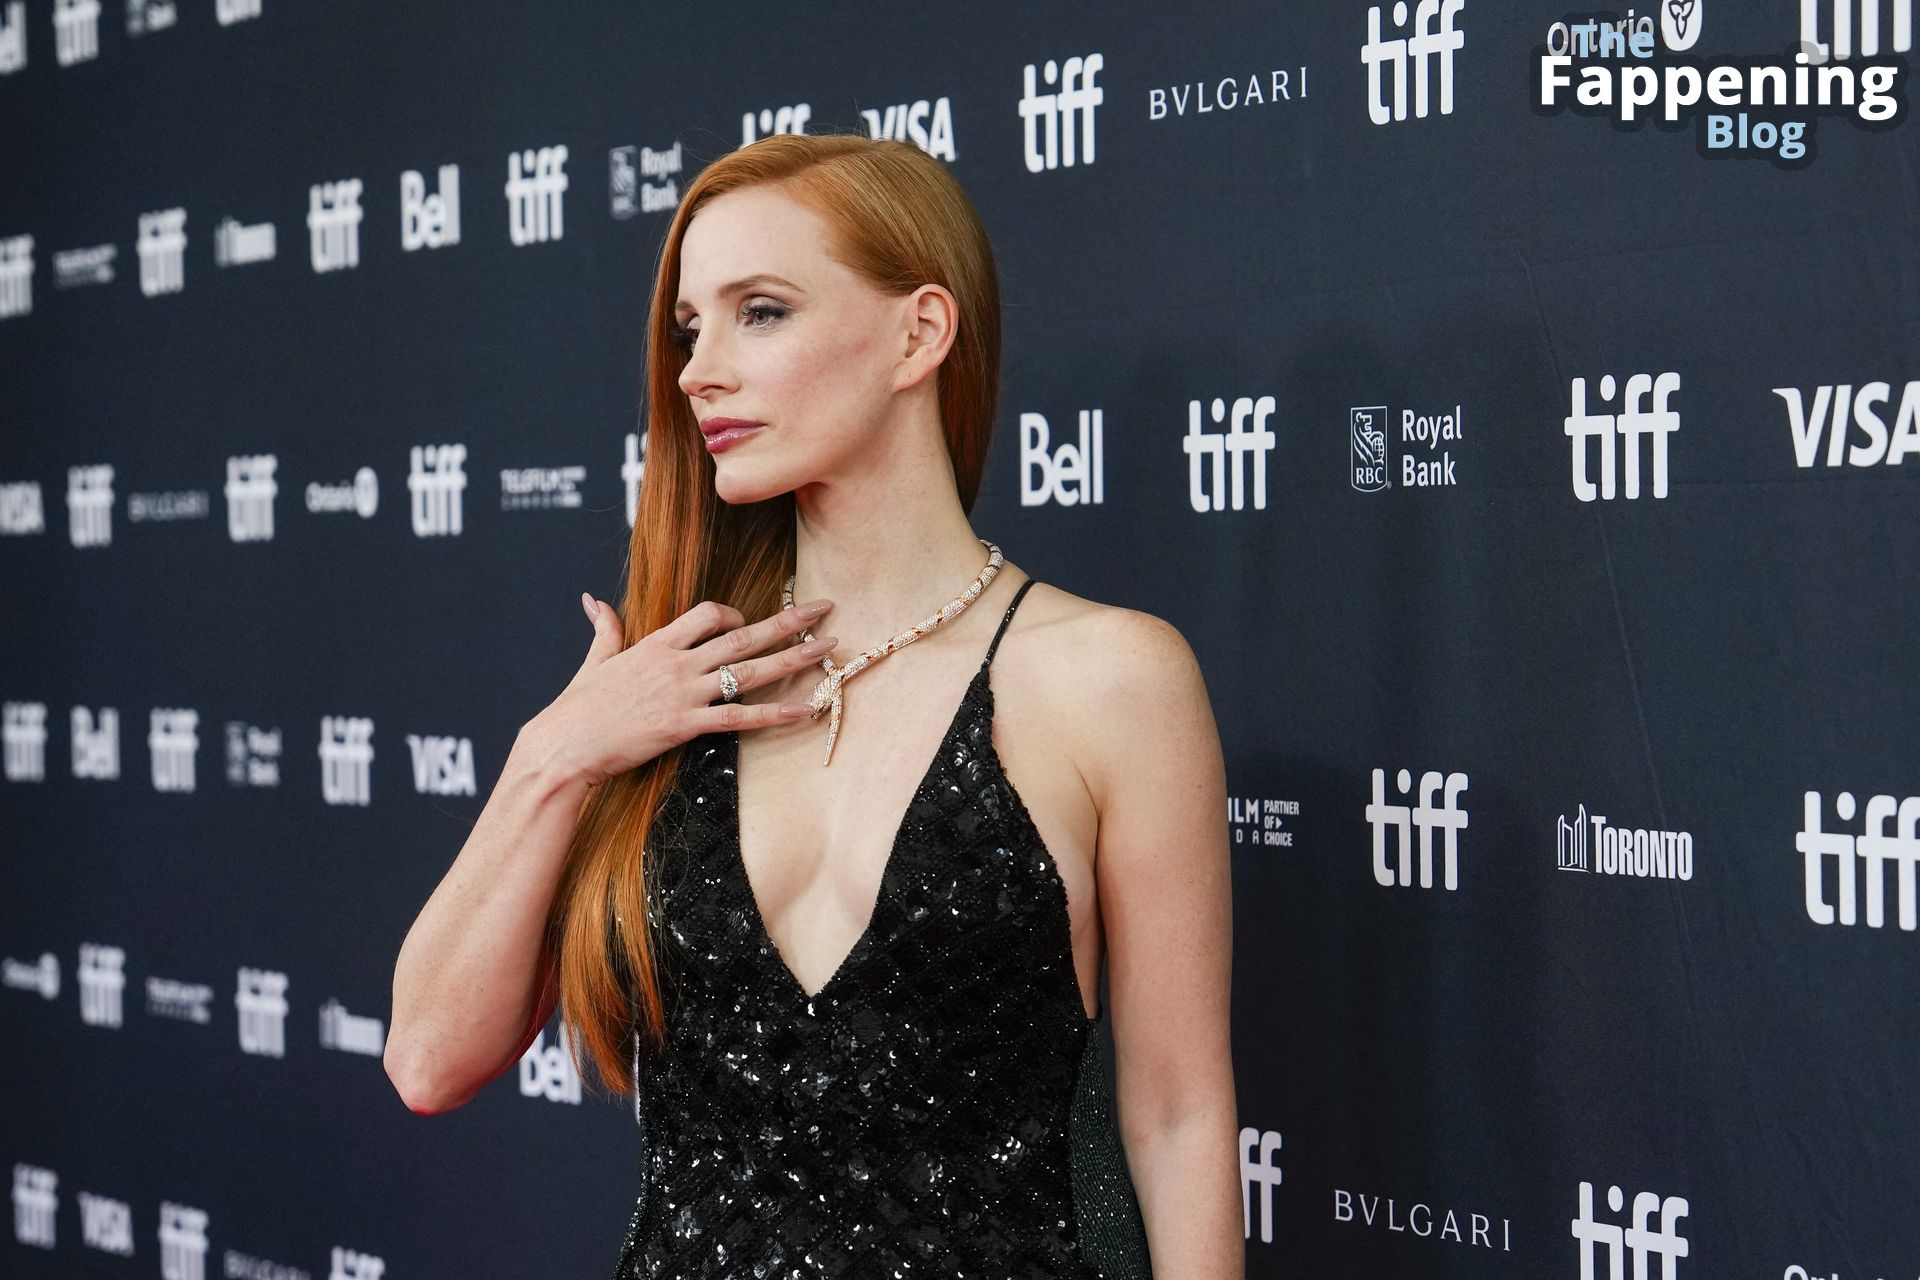 amanda querry share jessica chastain fappening photos